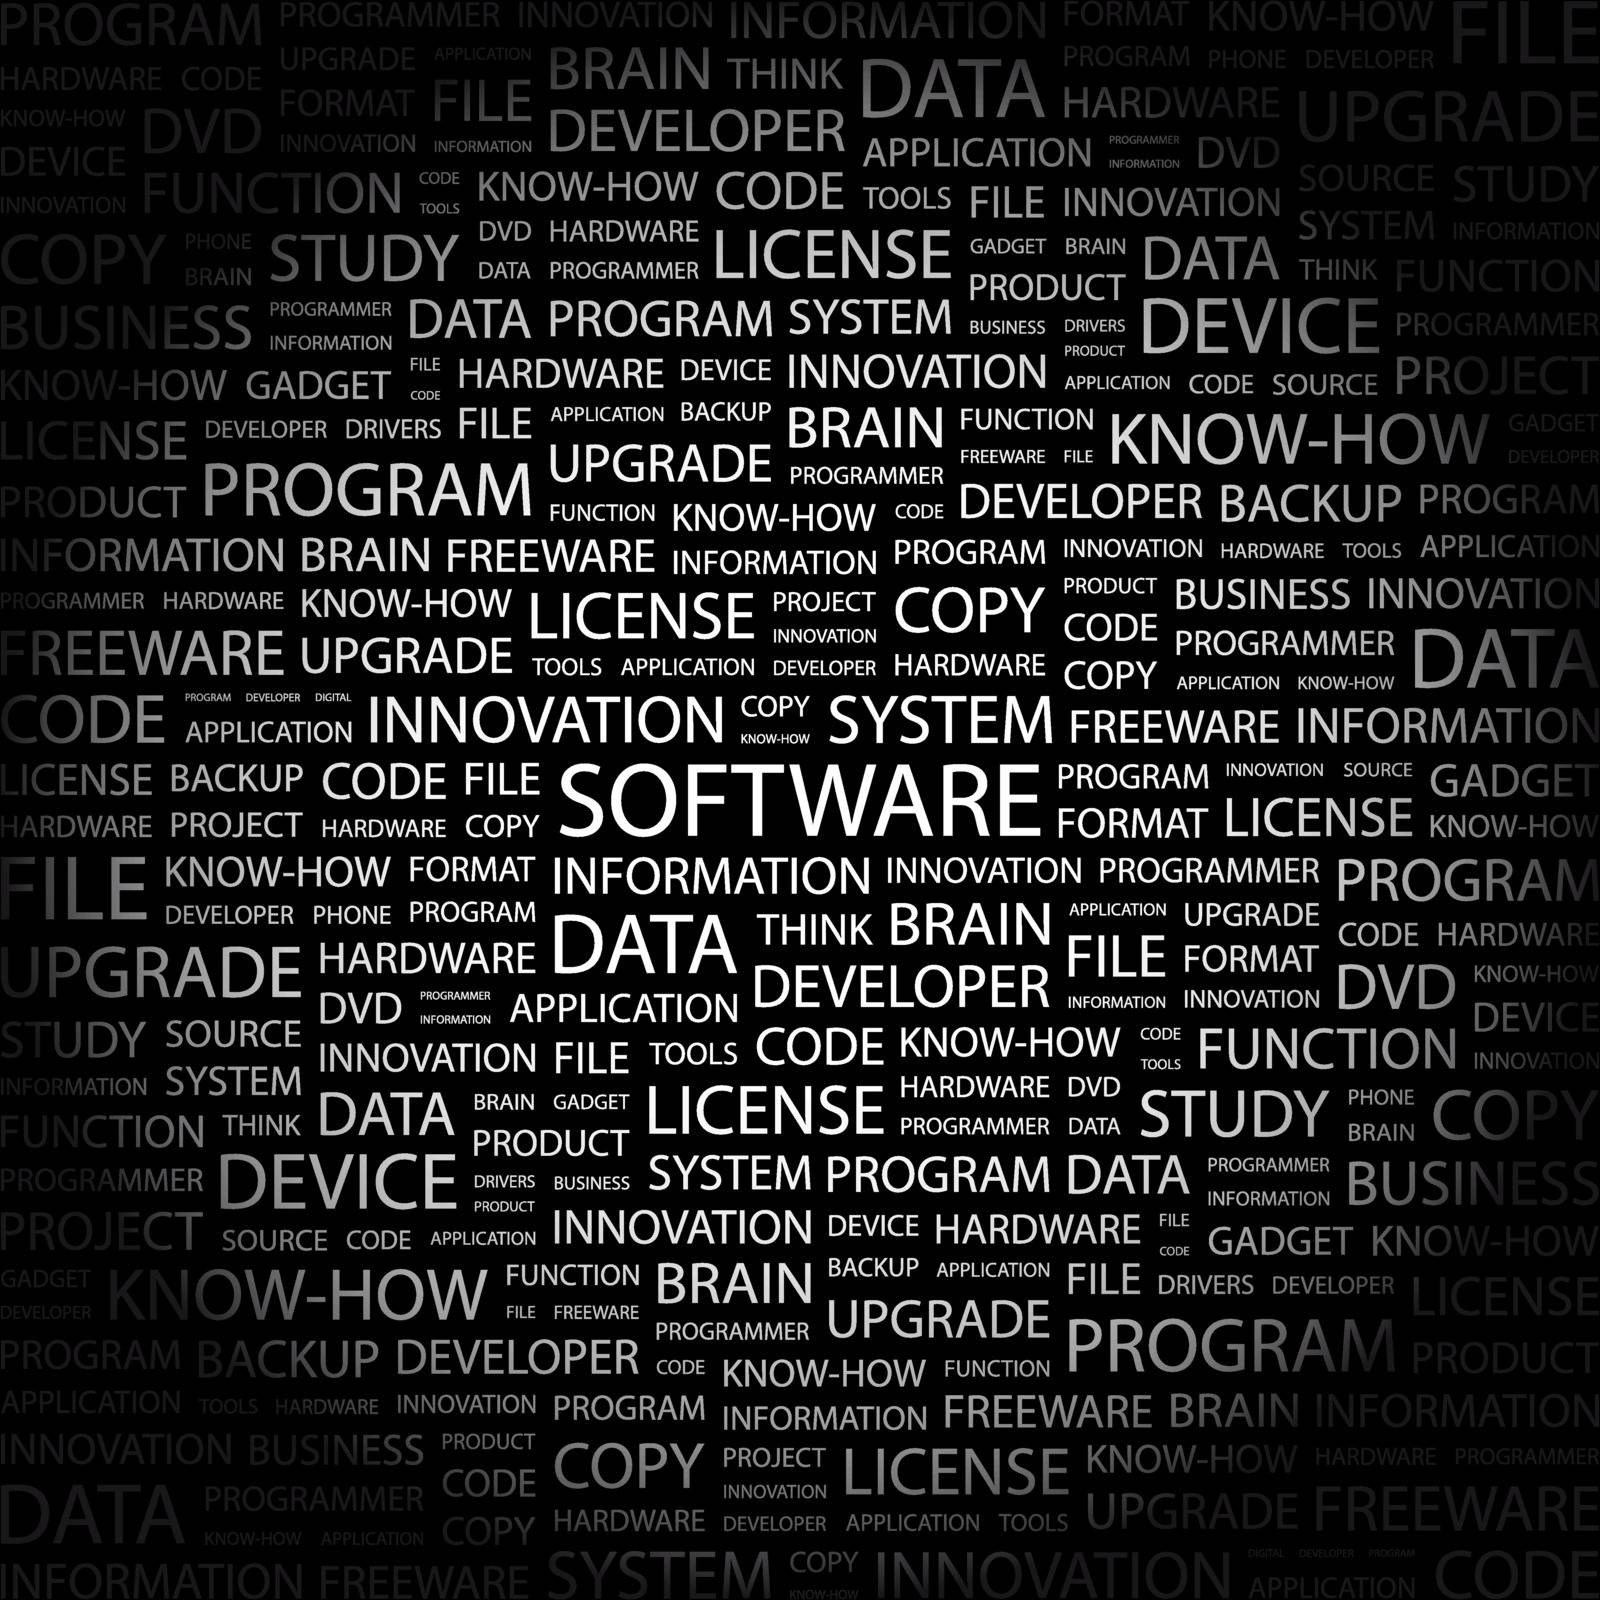 SOFTWARE by login